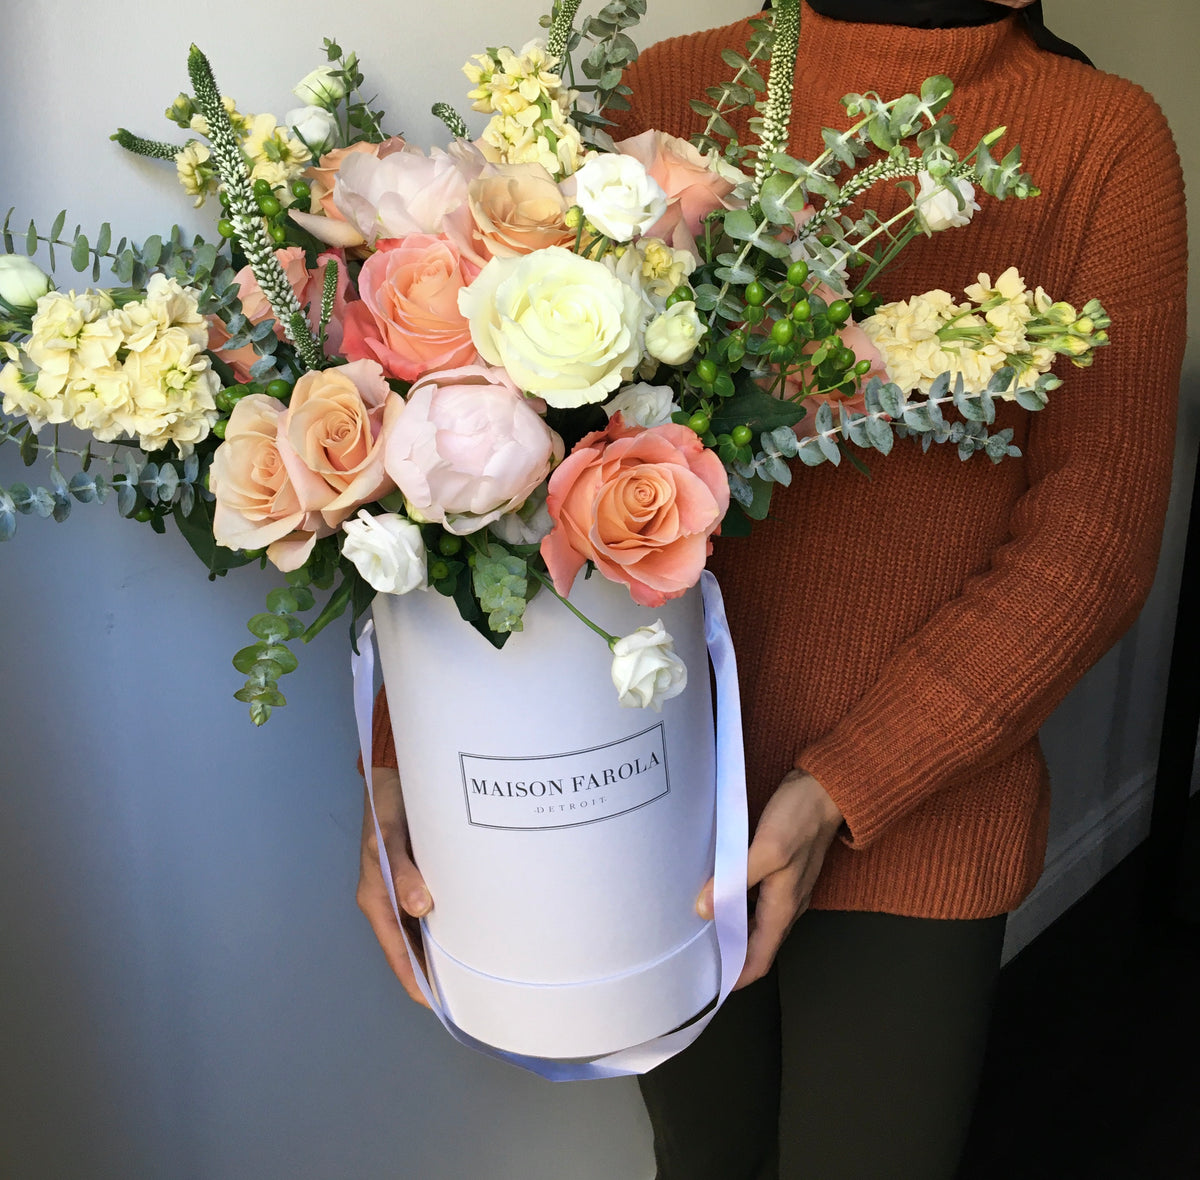 [flower_box], [maison_farola], [arrangement], [flowers], [birthday], [mothers_day], [delivery], [hat_box], [english_garden], [affordable_flowers], [blumz], [pot_and_box], [made_floral], [blush_and_co], [tiffany_florist], [blossoms], [fleurdetroit], [gift], [easter], [centerpiece], [baby_shower], [baby_girl], [baby_boy], [baptism], [event], [communion], [sympathy], [corporate], [flower_bouquet], [preserved]